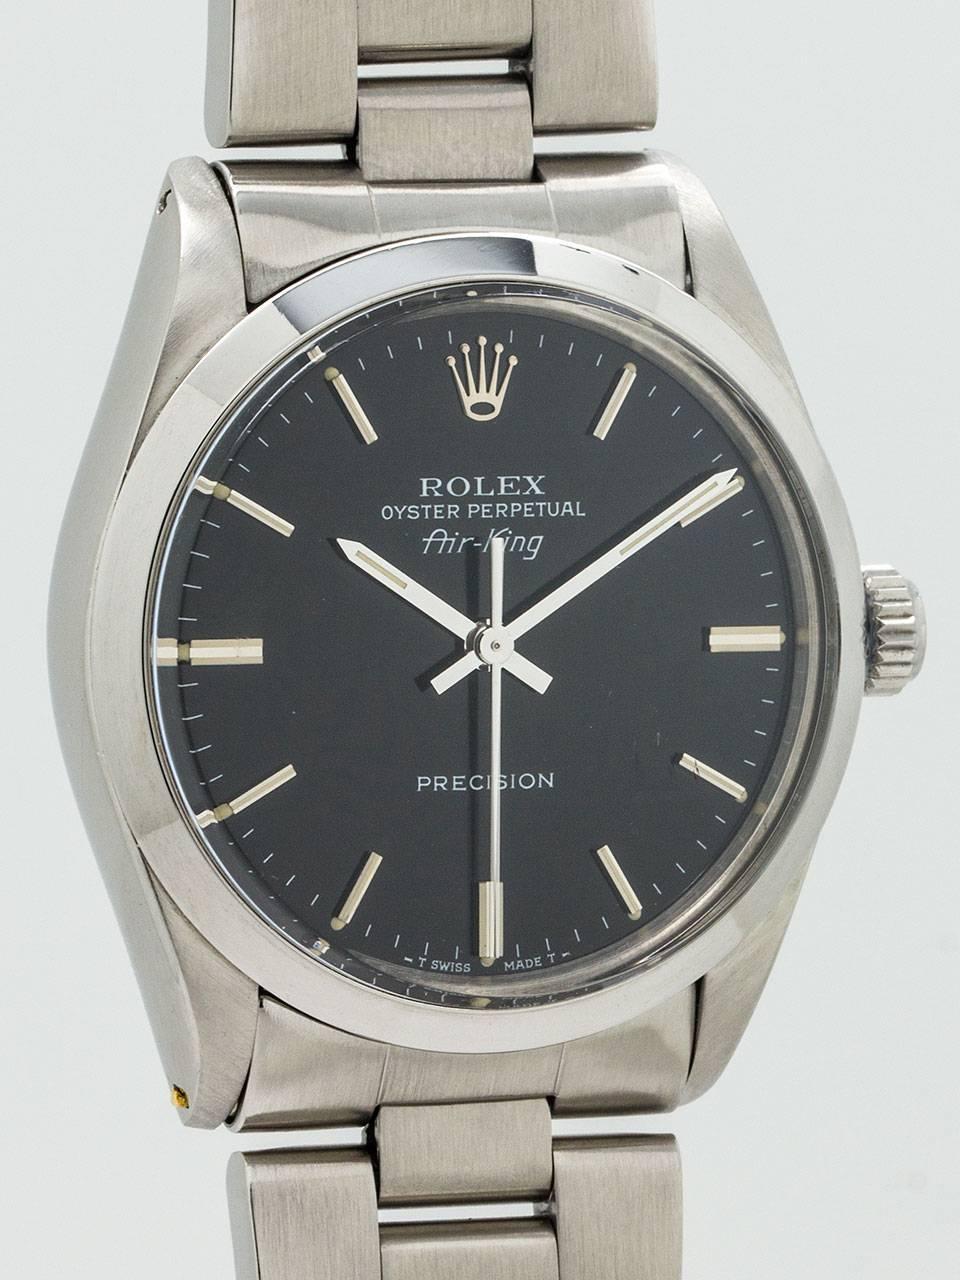 Rolex Oyster Perpetual Airking ref 5500 serial number L4 circa 1988. Featuring 34mm diameter stainless steel case with smooth bezel and acrylic crystal. scarce original black dial with applied silver indexes and silver baton hands. Powered by